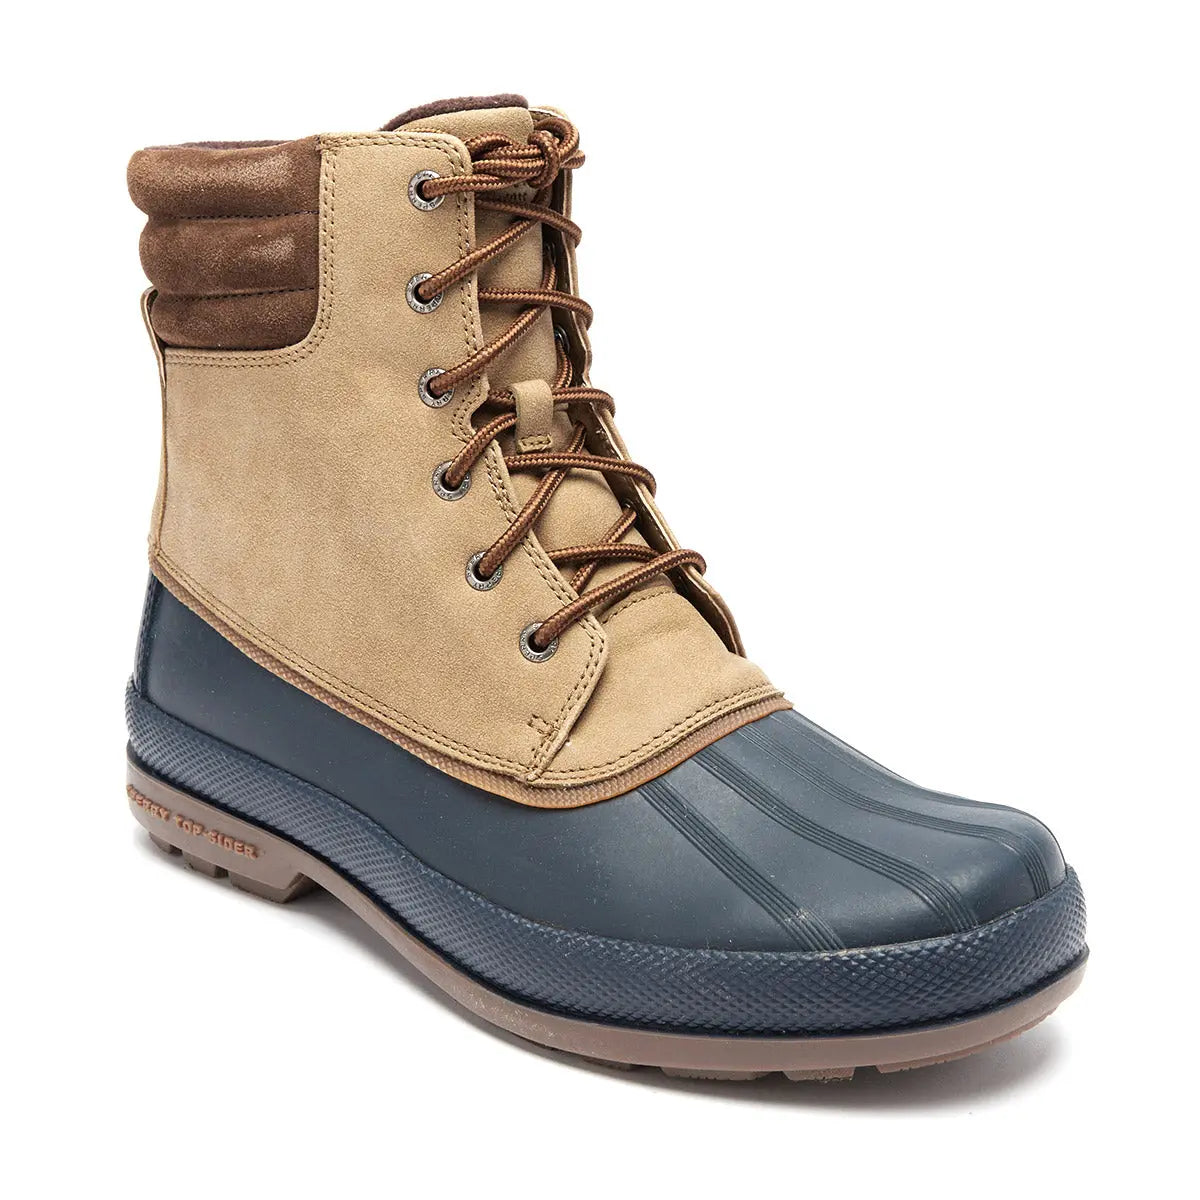 Image of Sperry Men's Top-Sider Cold Bay Duck Boot